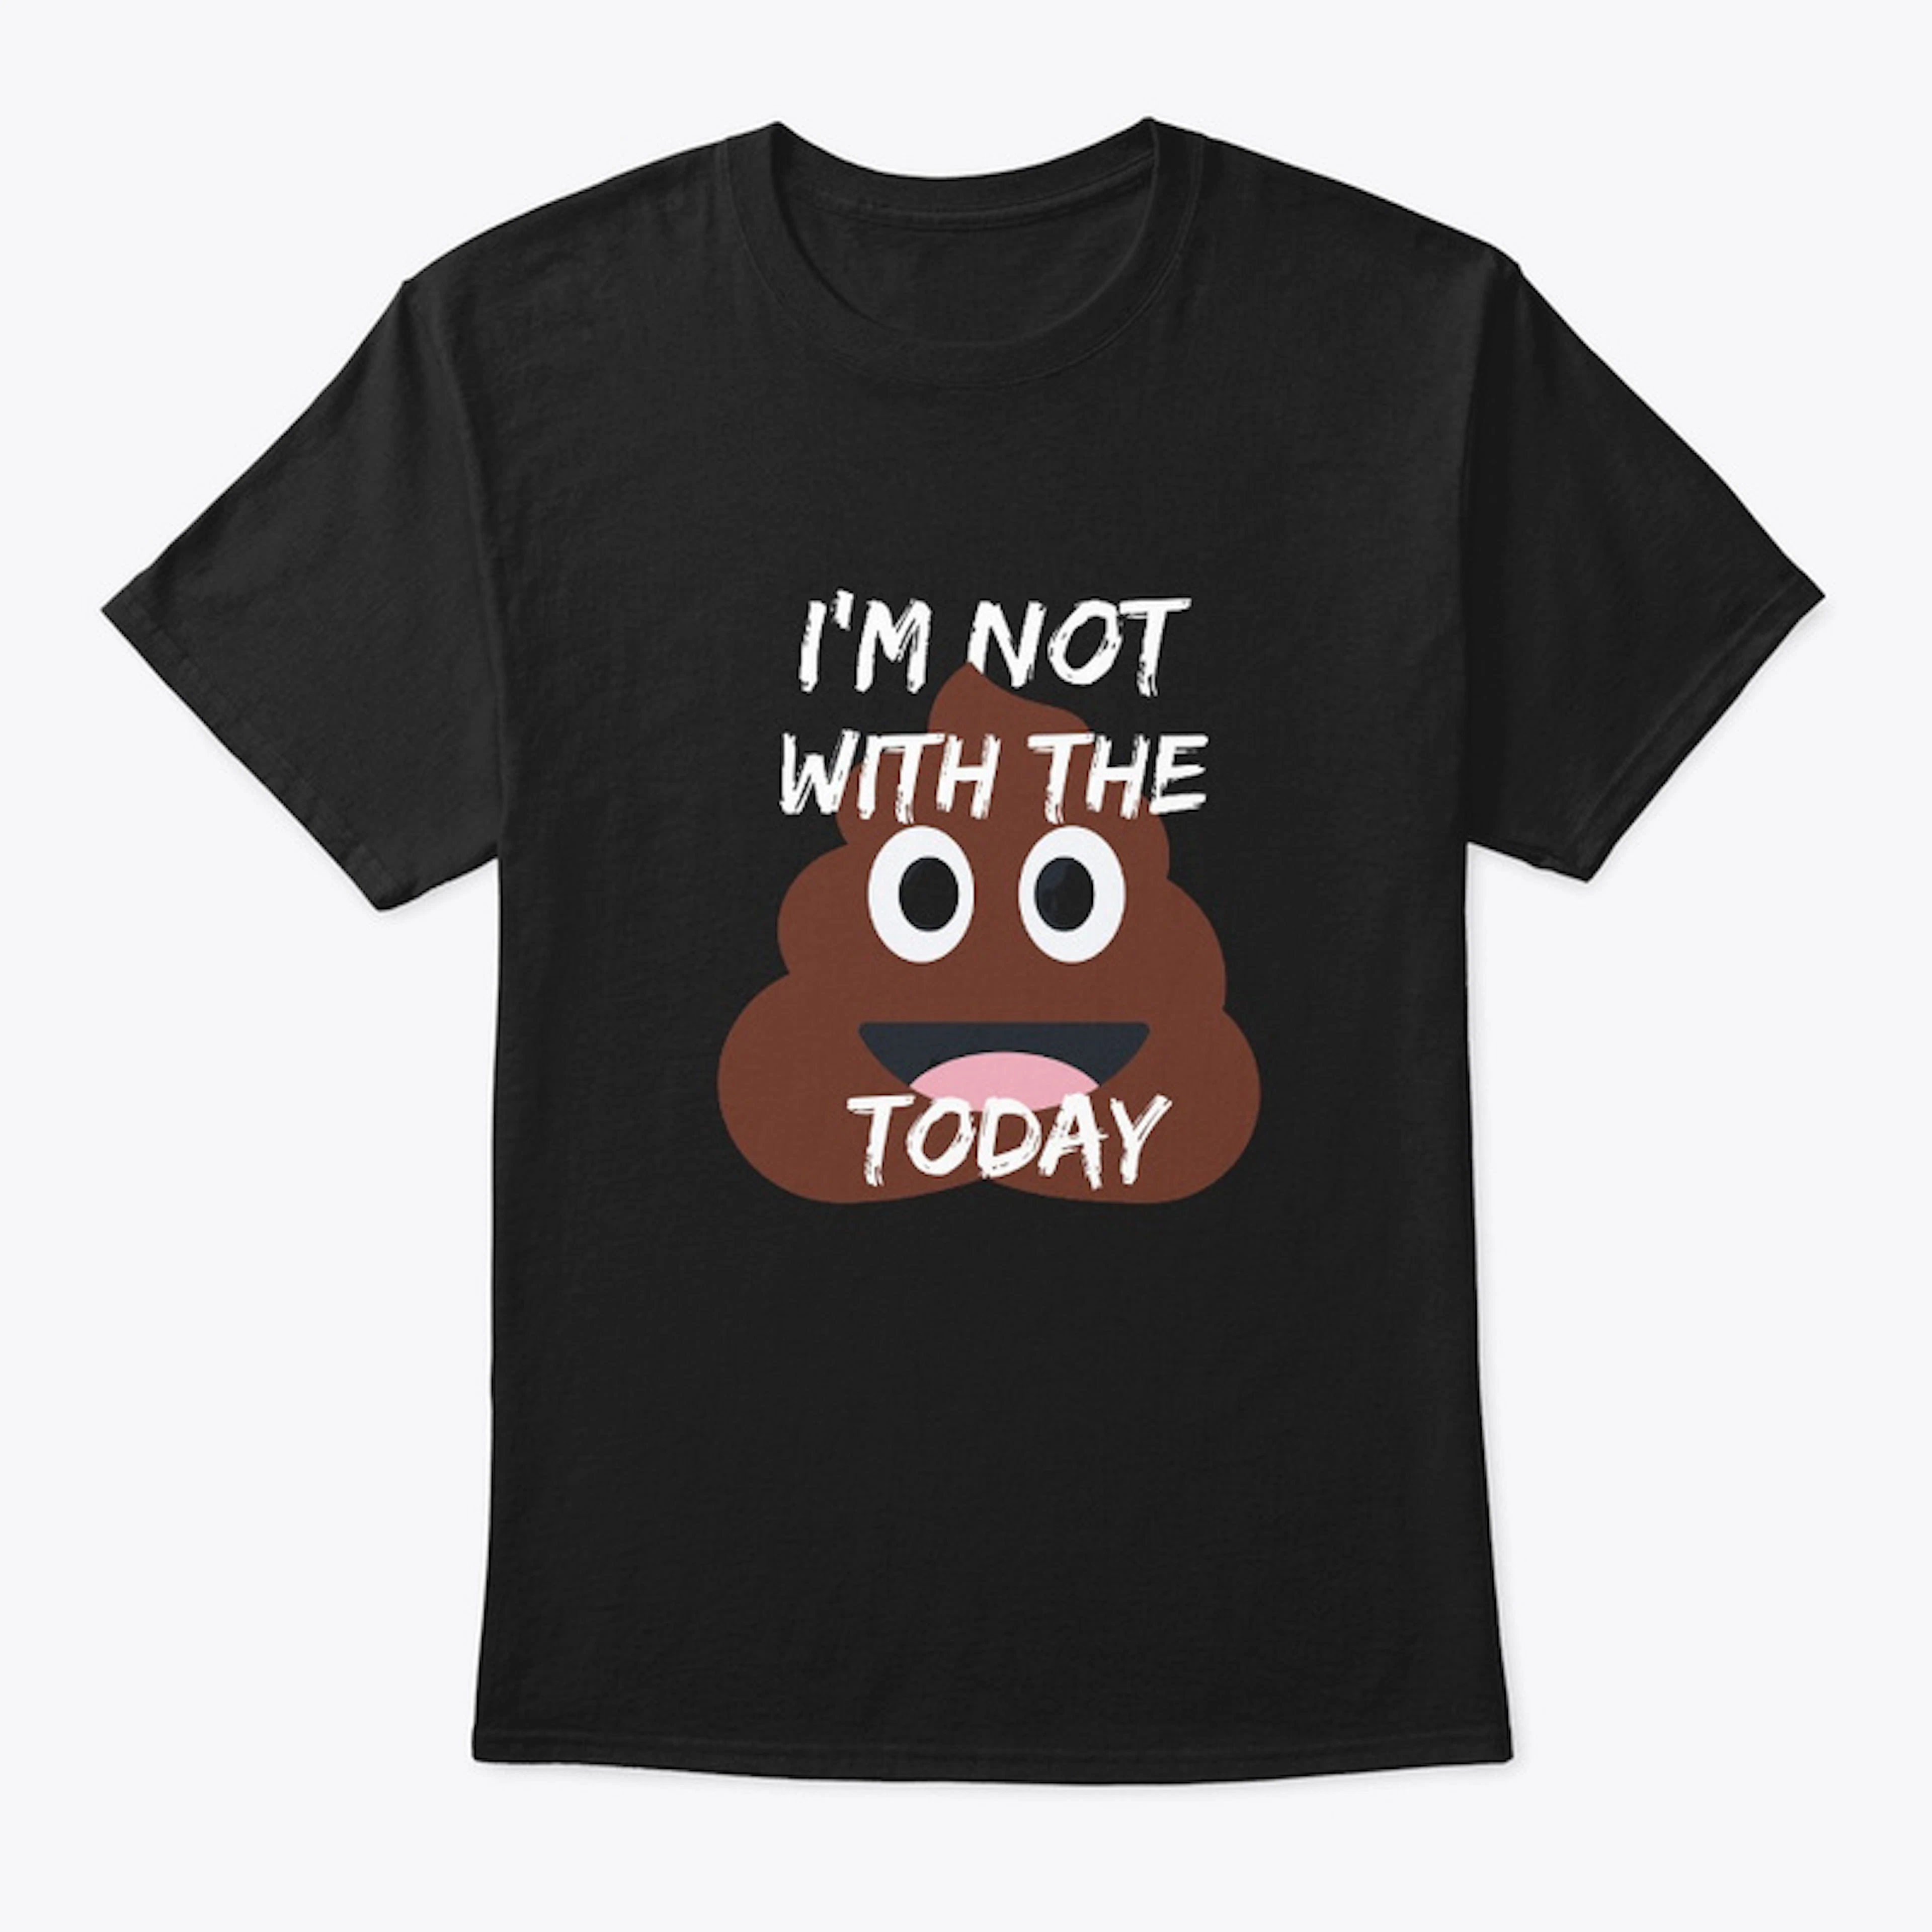 Not With the Shit Today (unisex) - Black